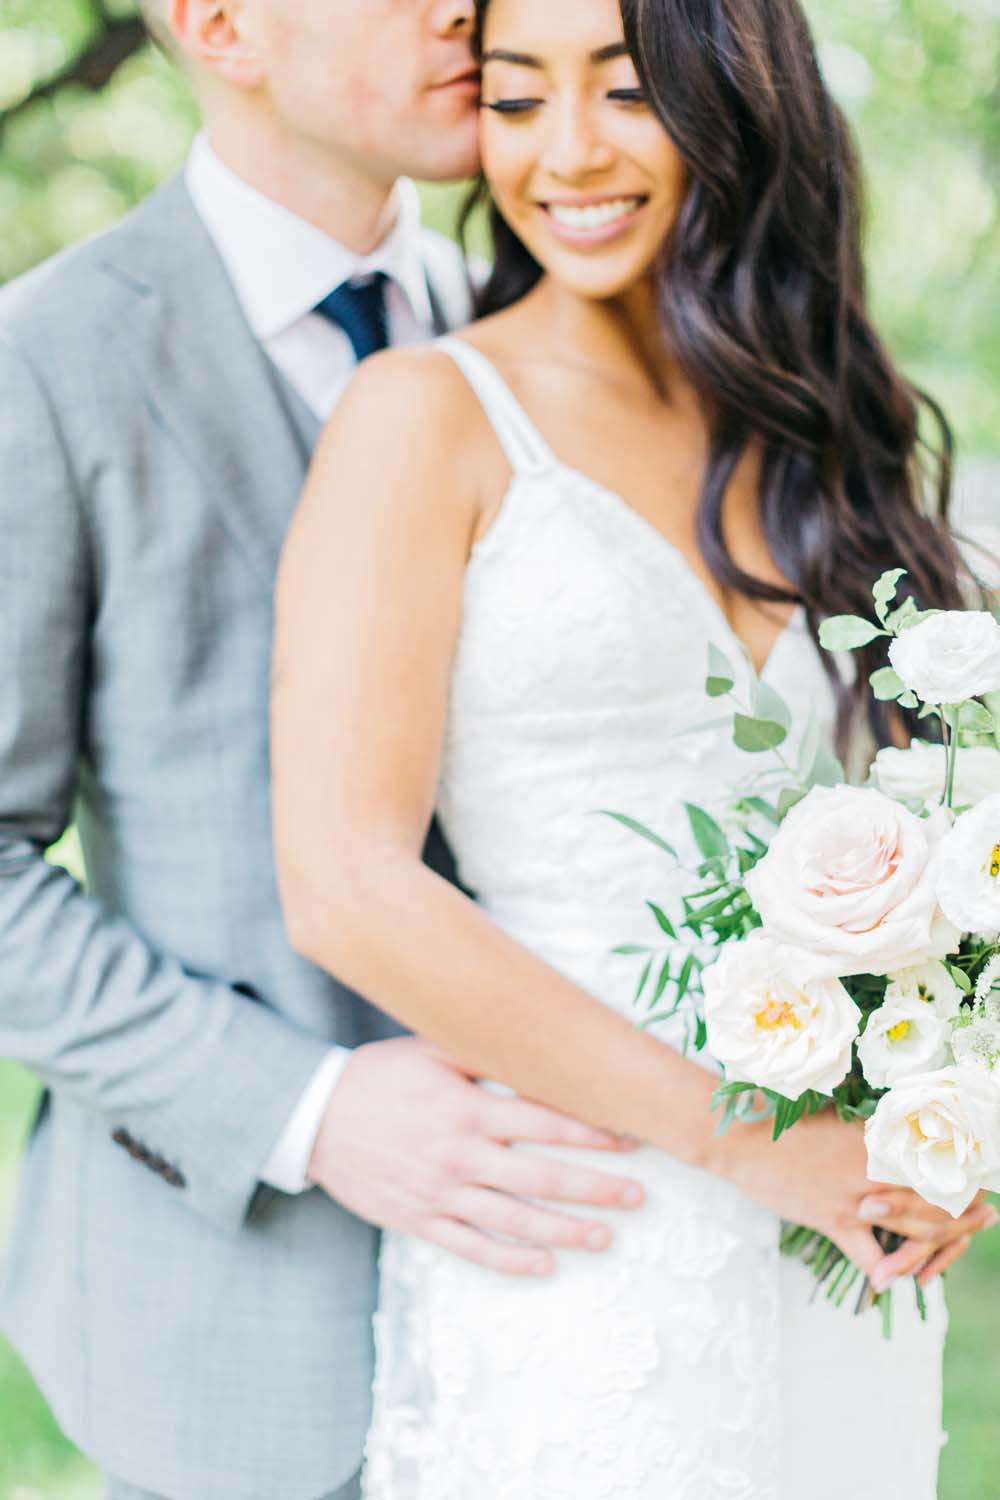 A Bright and Airy September Wedding in Toronto, Ontario - Bride and Groom